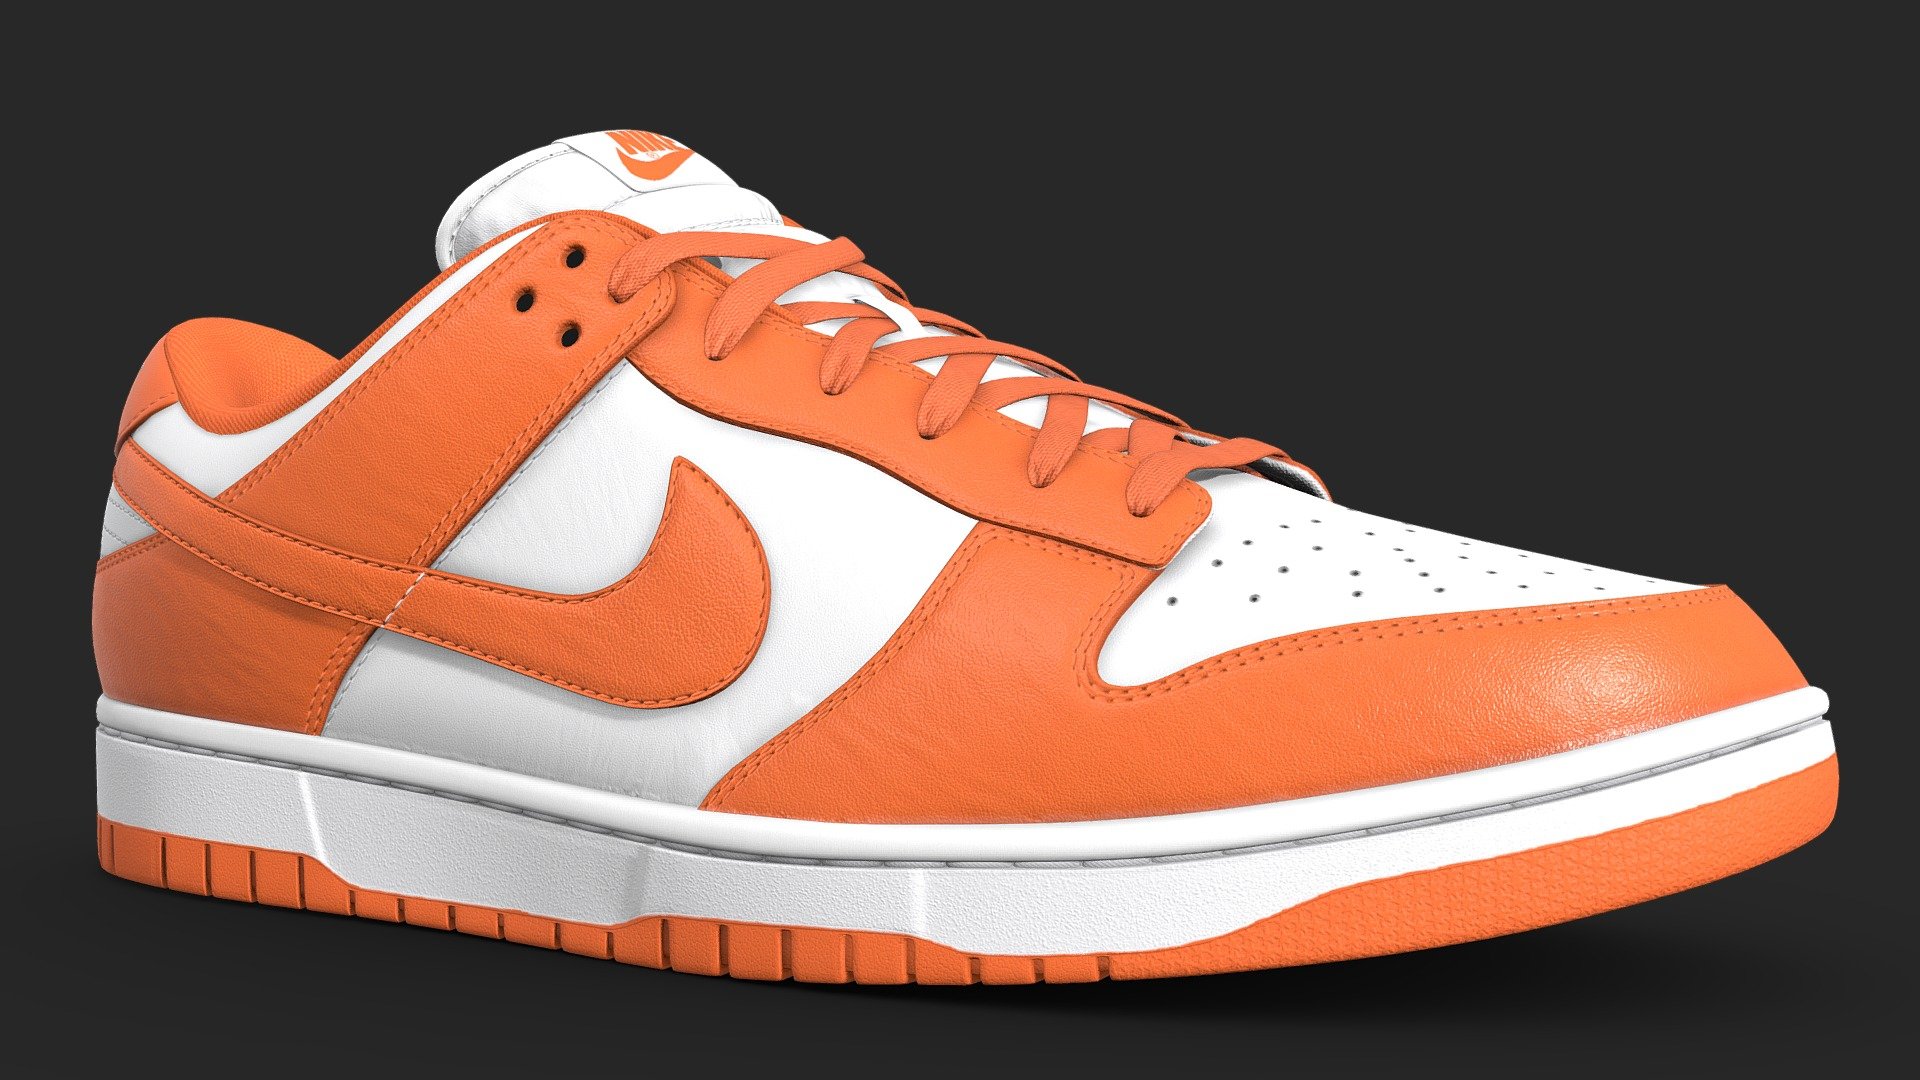 Nike Dunk Low in the Syracuse Colourway. Every detail was made in the recreation of this shoe, from the text on the medial side of the shoe to the subtlety of each material, nothing went overlooked. Stitches were sculpted by hand to achieve the highest quality

What's included




Blender file with linked textures

FBX and OBJ versions

OneMesh version

All 4k textures

Model Features

The upmost care went into crafting this model. As a result it is subdivision ready. The model was unwrapped with efficiency in mind. Both left and right shoes are mostly identical, save for logos and text that cannot be mirrored. As such the high detail version of the shoe uses 4 UV maps to cover both of the shoes, with the One mesh version using just the one UV map 3d model